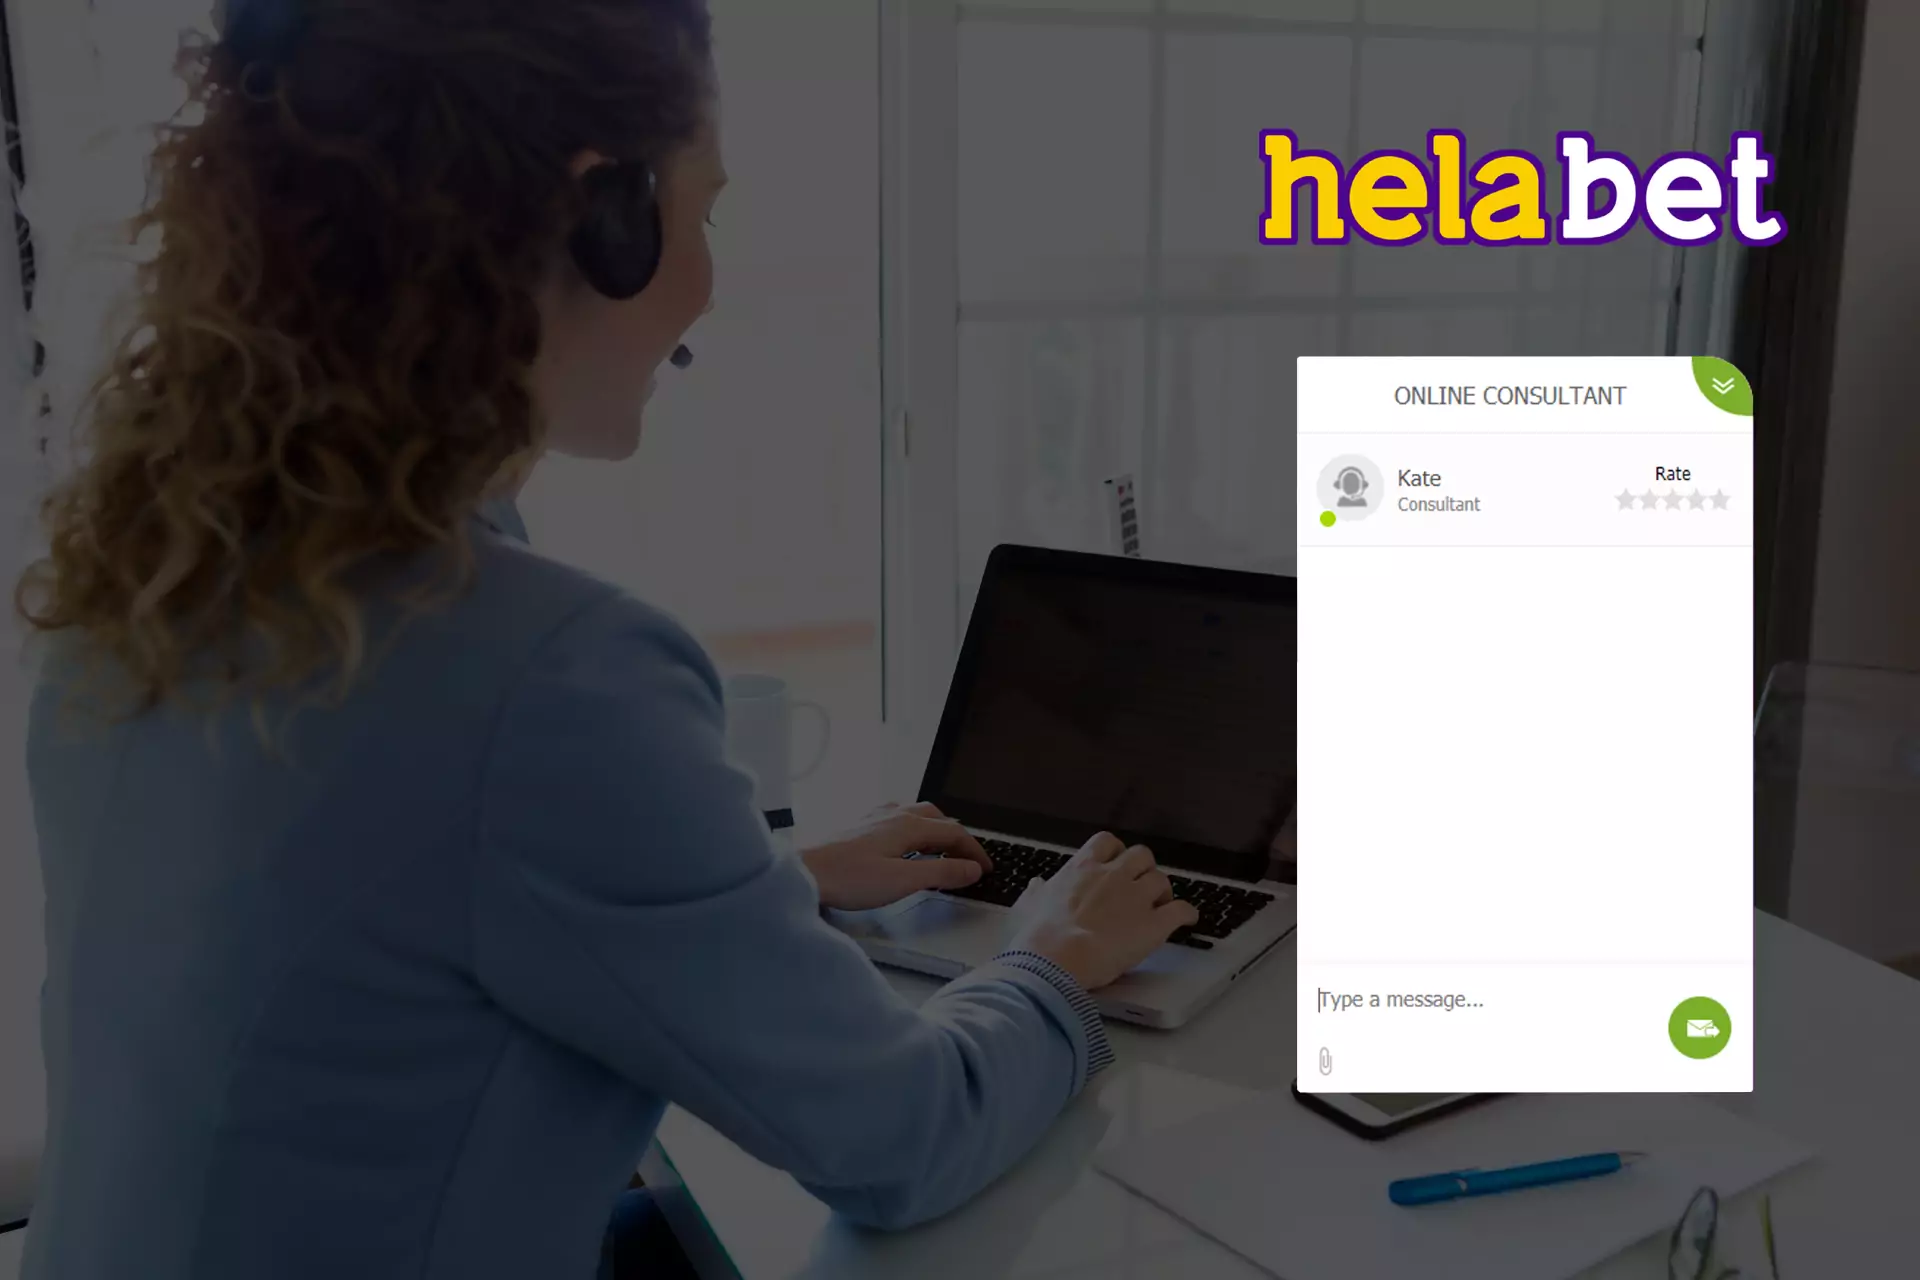 If you have any questions about Helabet in India, please contact Customer Service.